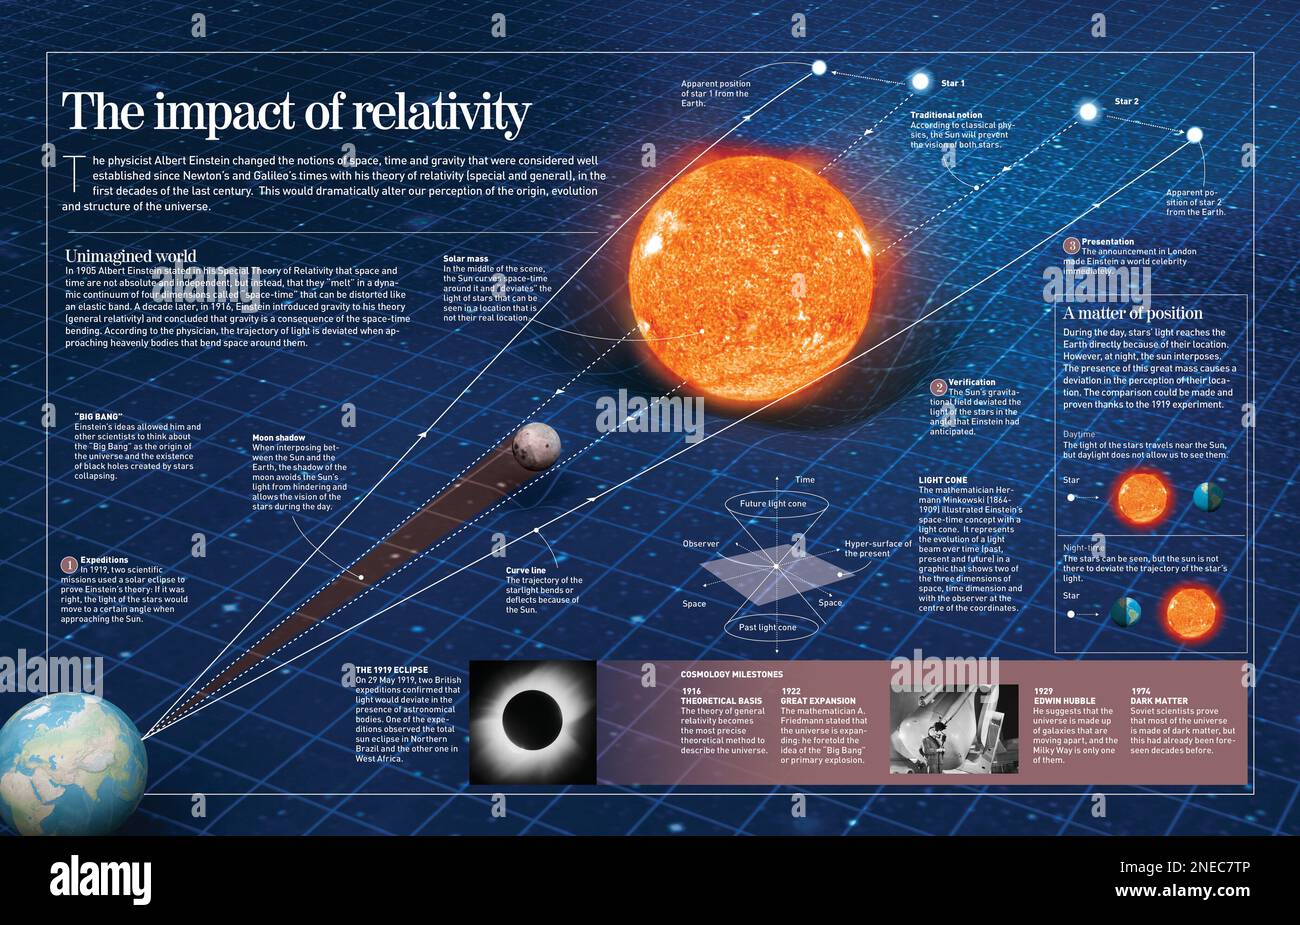 Infographic about the theory of relativity by Albert Einstein, who proposed the space/time curvature in 1905 and 1916. [Adobe InDesign (.indd); 4960x8503]. Stock Photo